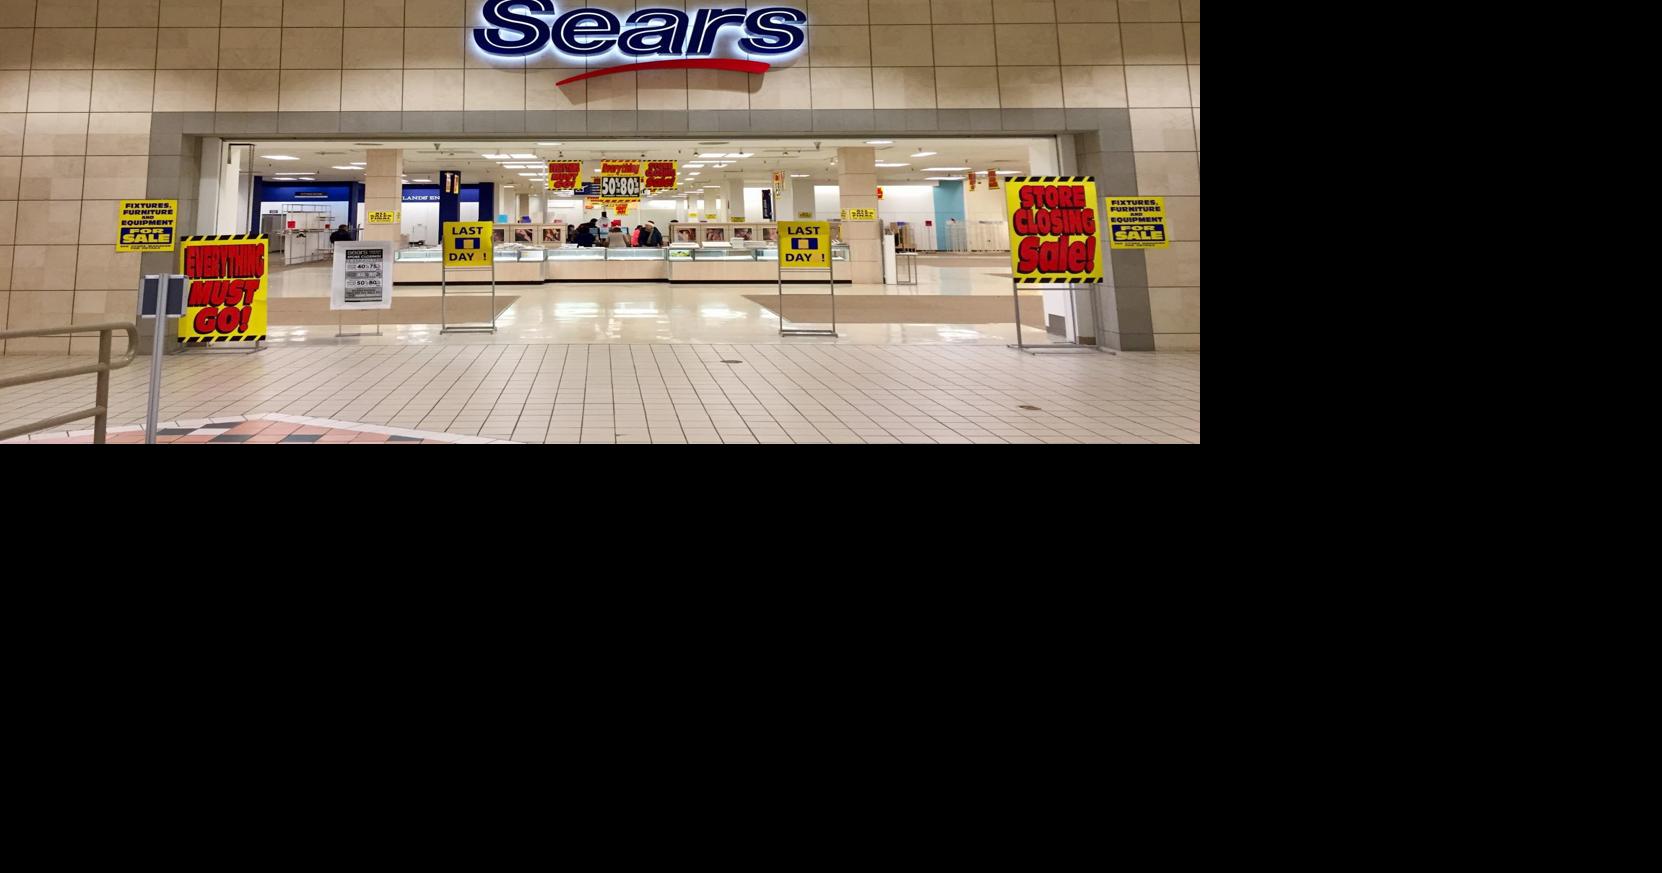 Sears - The Gardens Mall